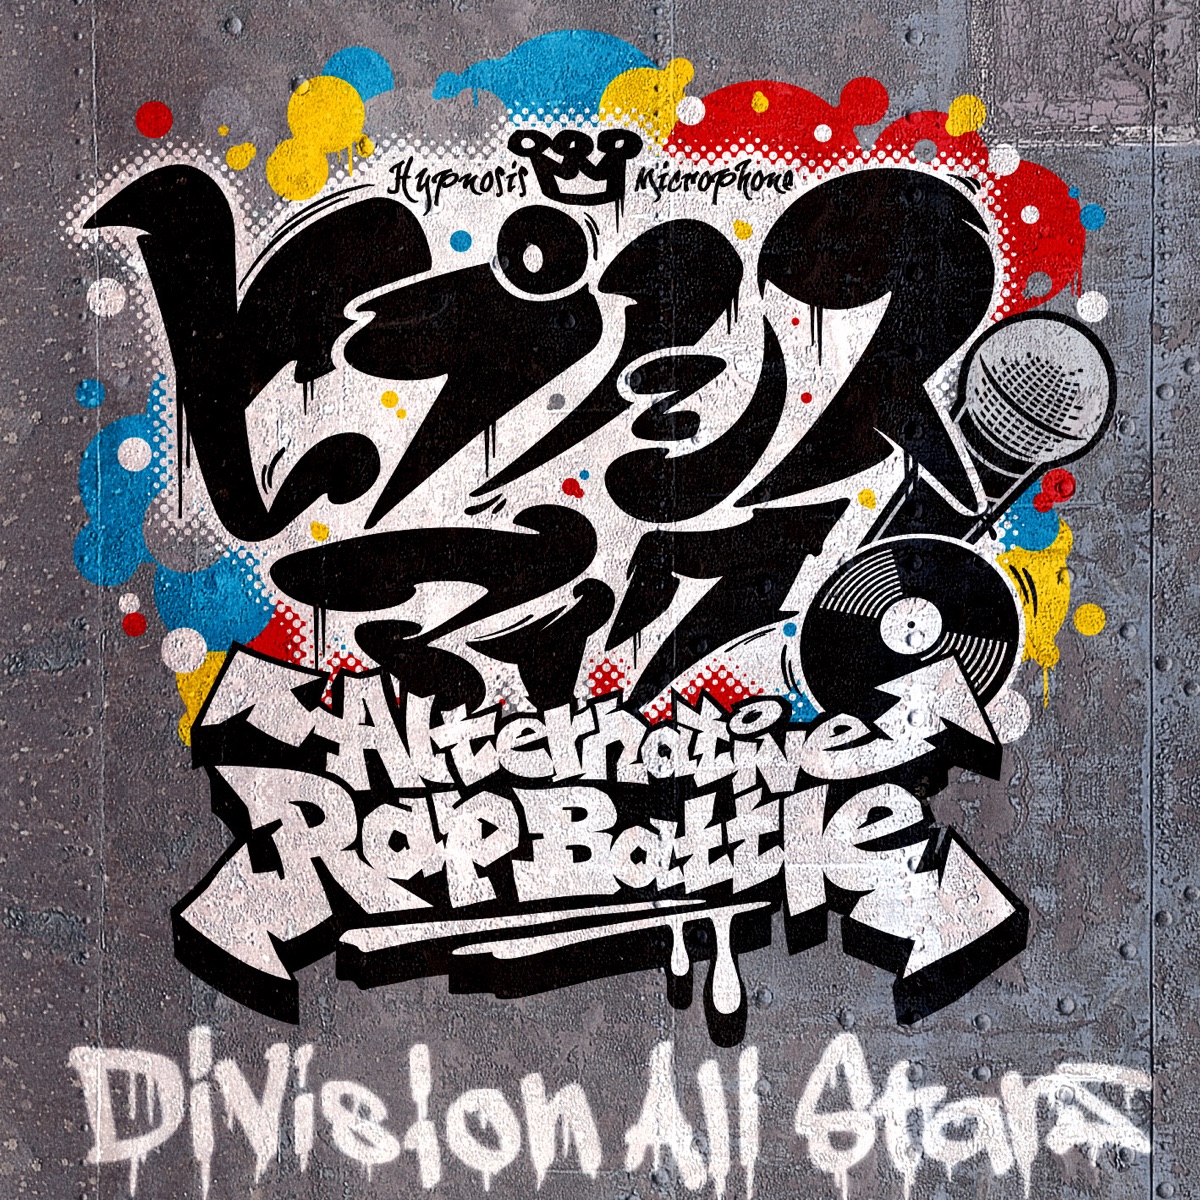 Cover art for『Division All Stars - Hypnosis Mic -Alternative Rap Battle-』from the release『Hypnosis Mic -Alternative Rap Battle-』